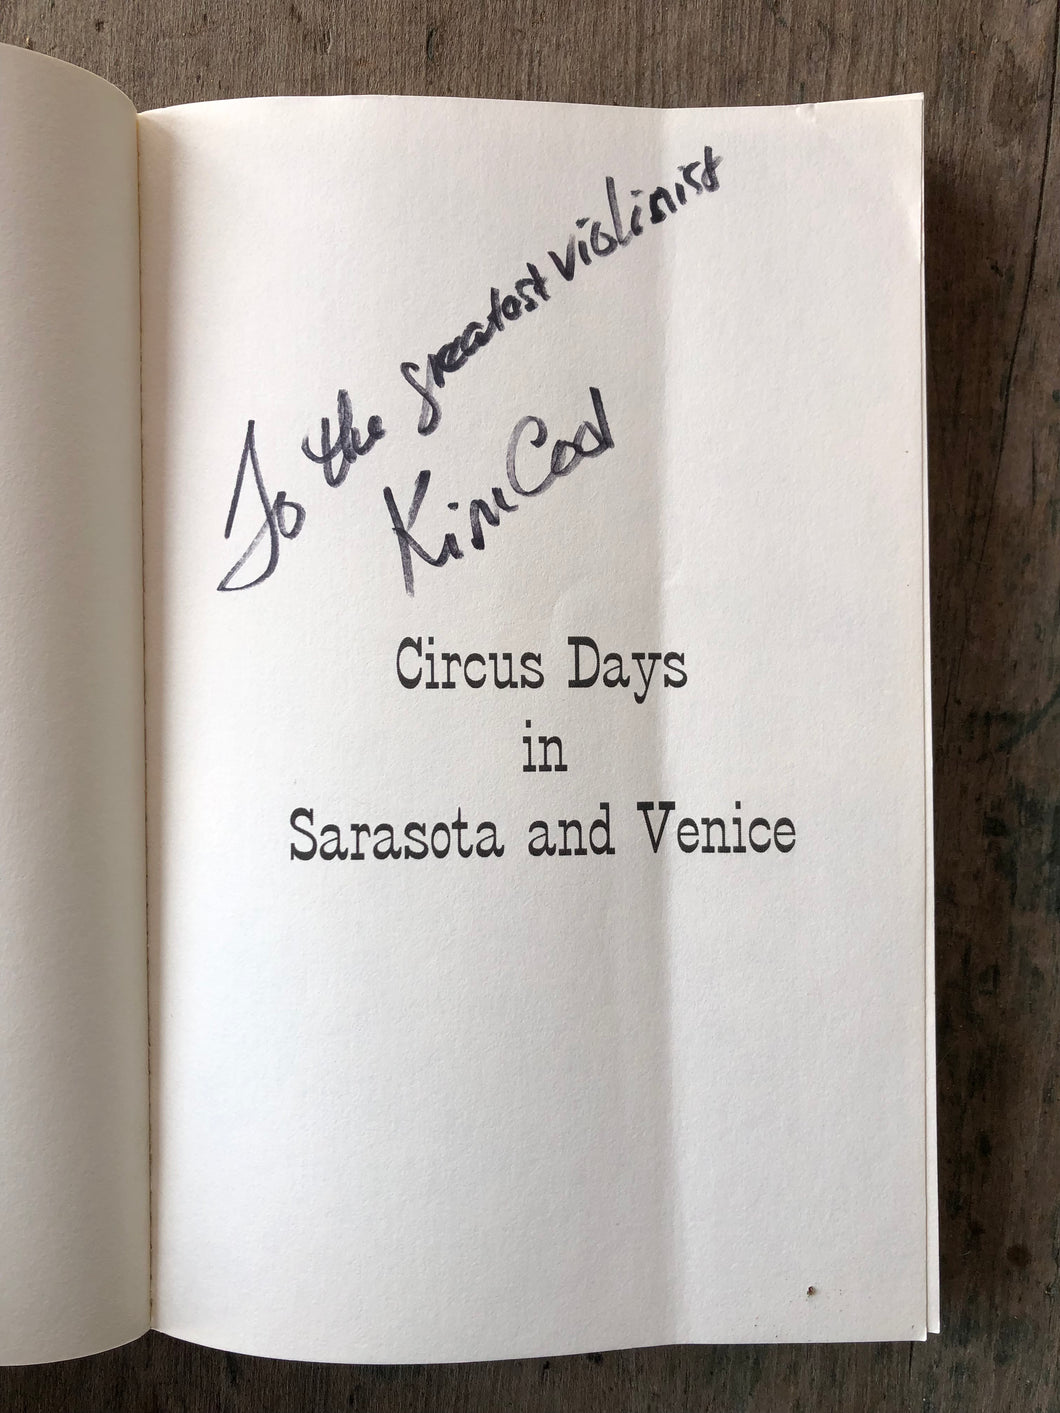 Circus Days in Sarasota and Venice. by Kim Cool